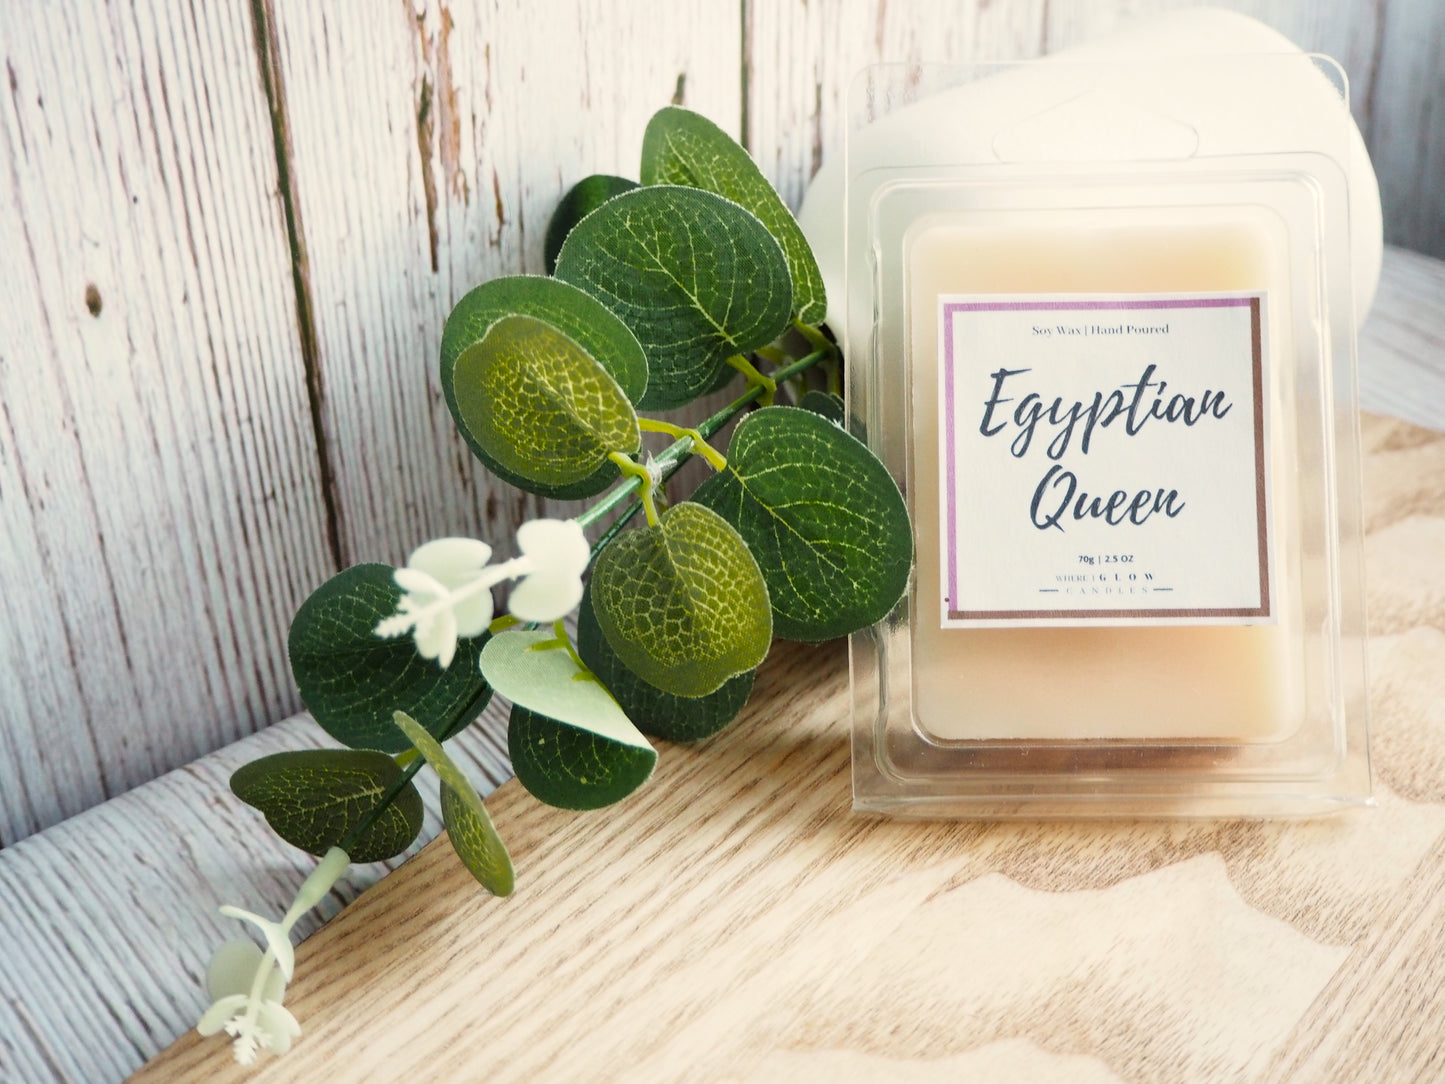 Egyptian Queen Spicy Soy Wax Melts by Where I Glow